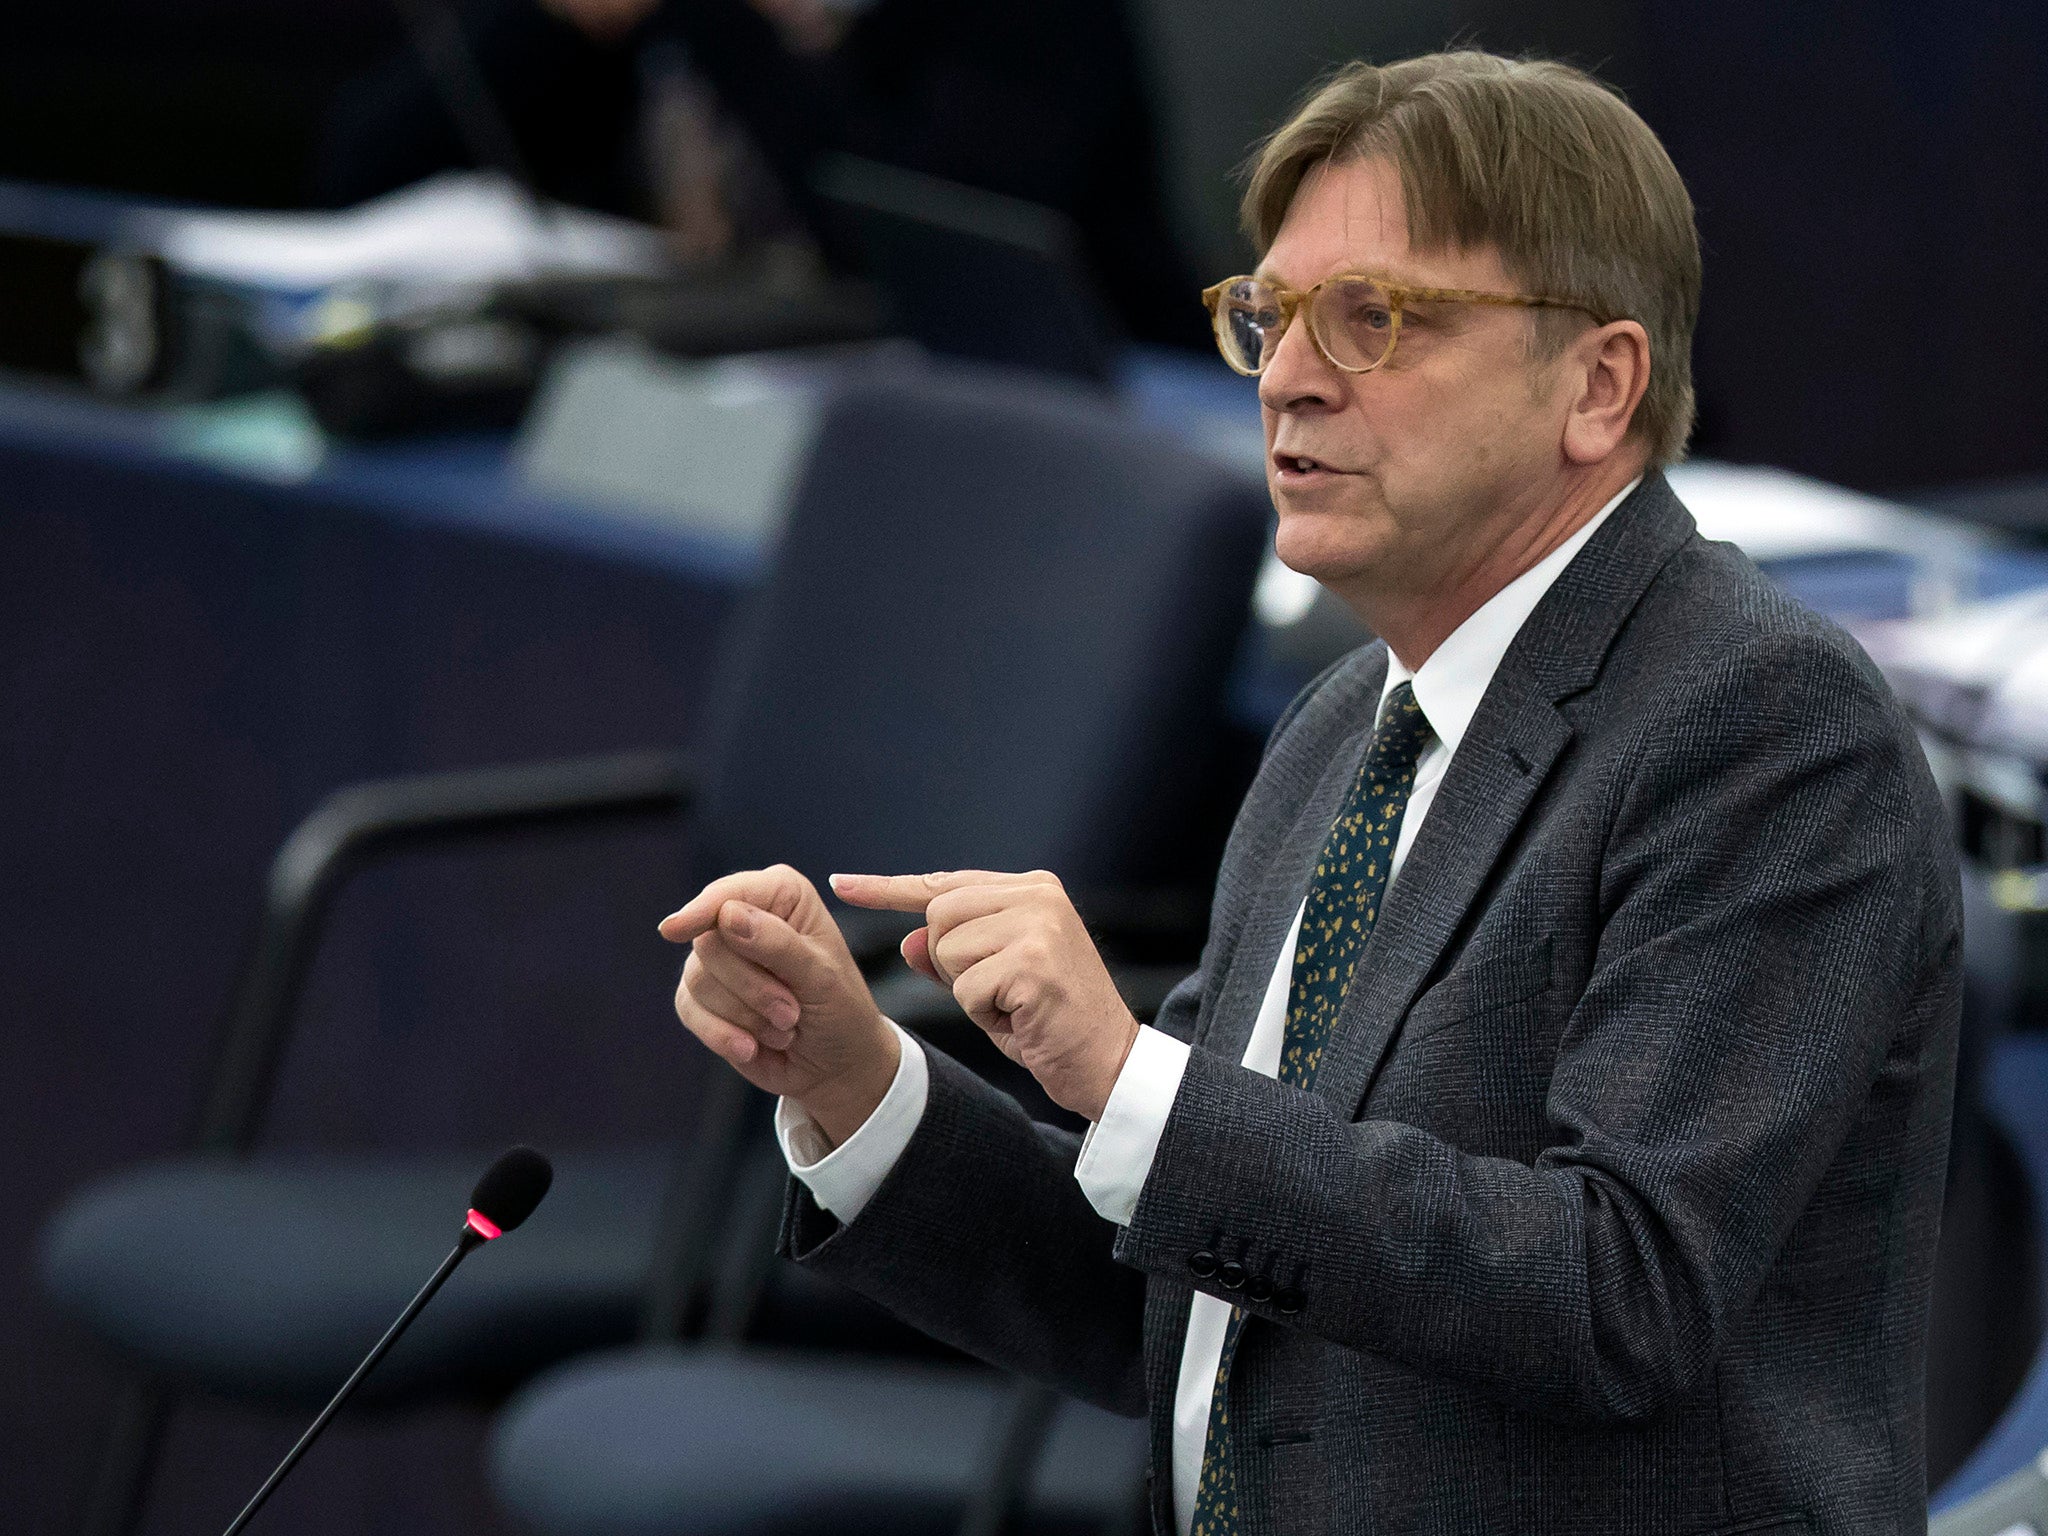 Guy Verhofstadt says the article would have delighted Hungary’s authoritarian prime minister Viktor Orban